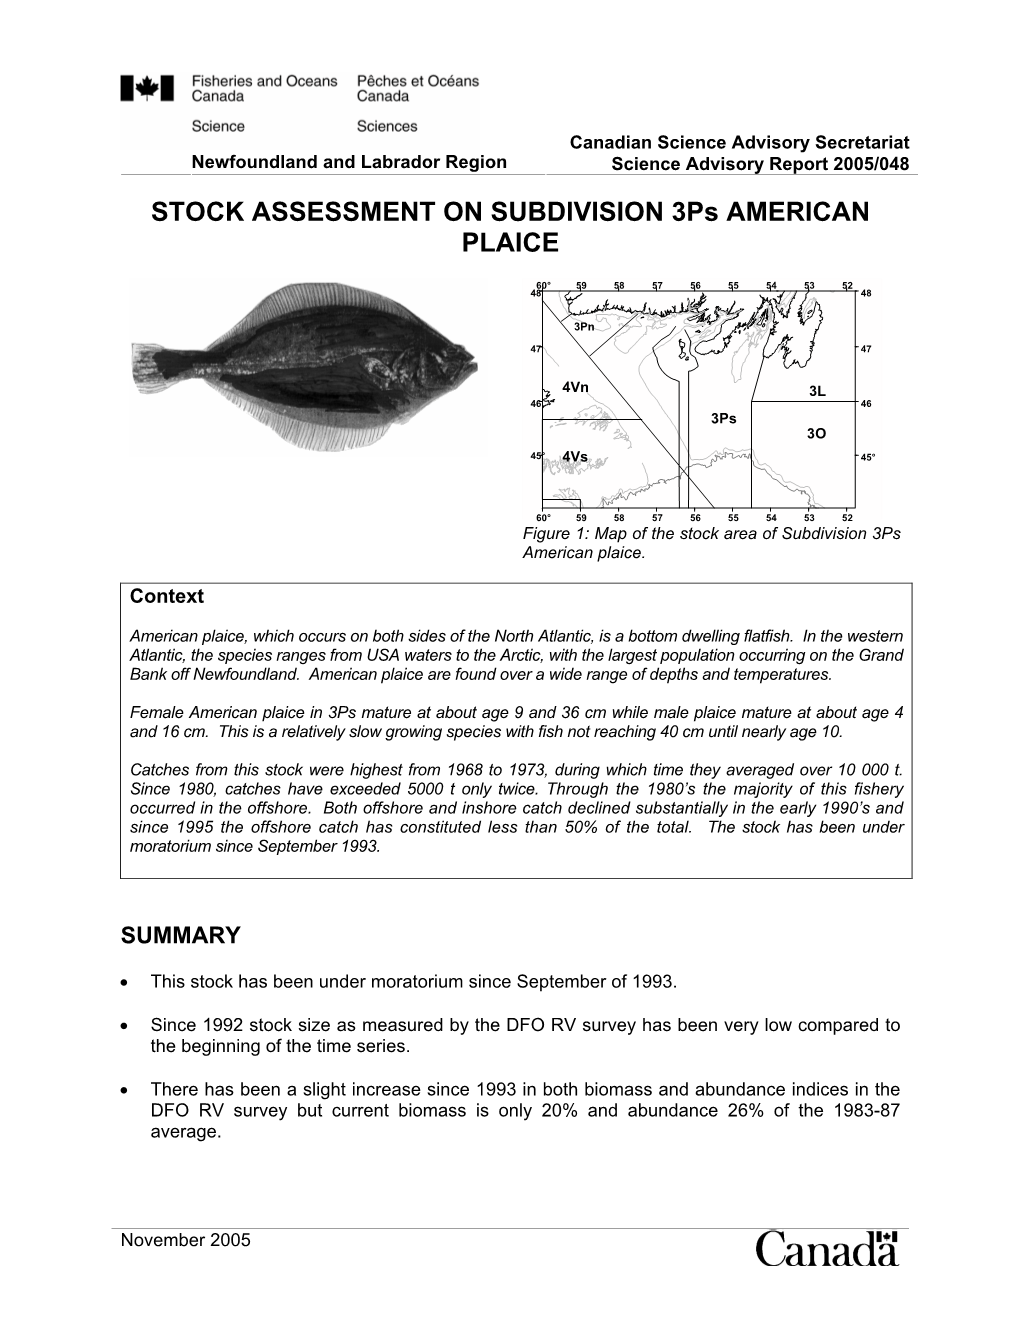 STOCK ASSESSMENT on SUBDIVISION 3Ps AMERICAN PLAICE